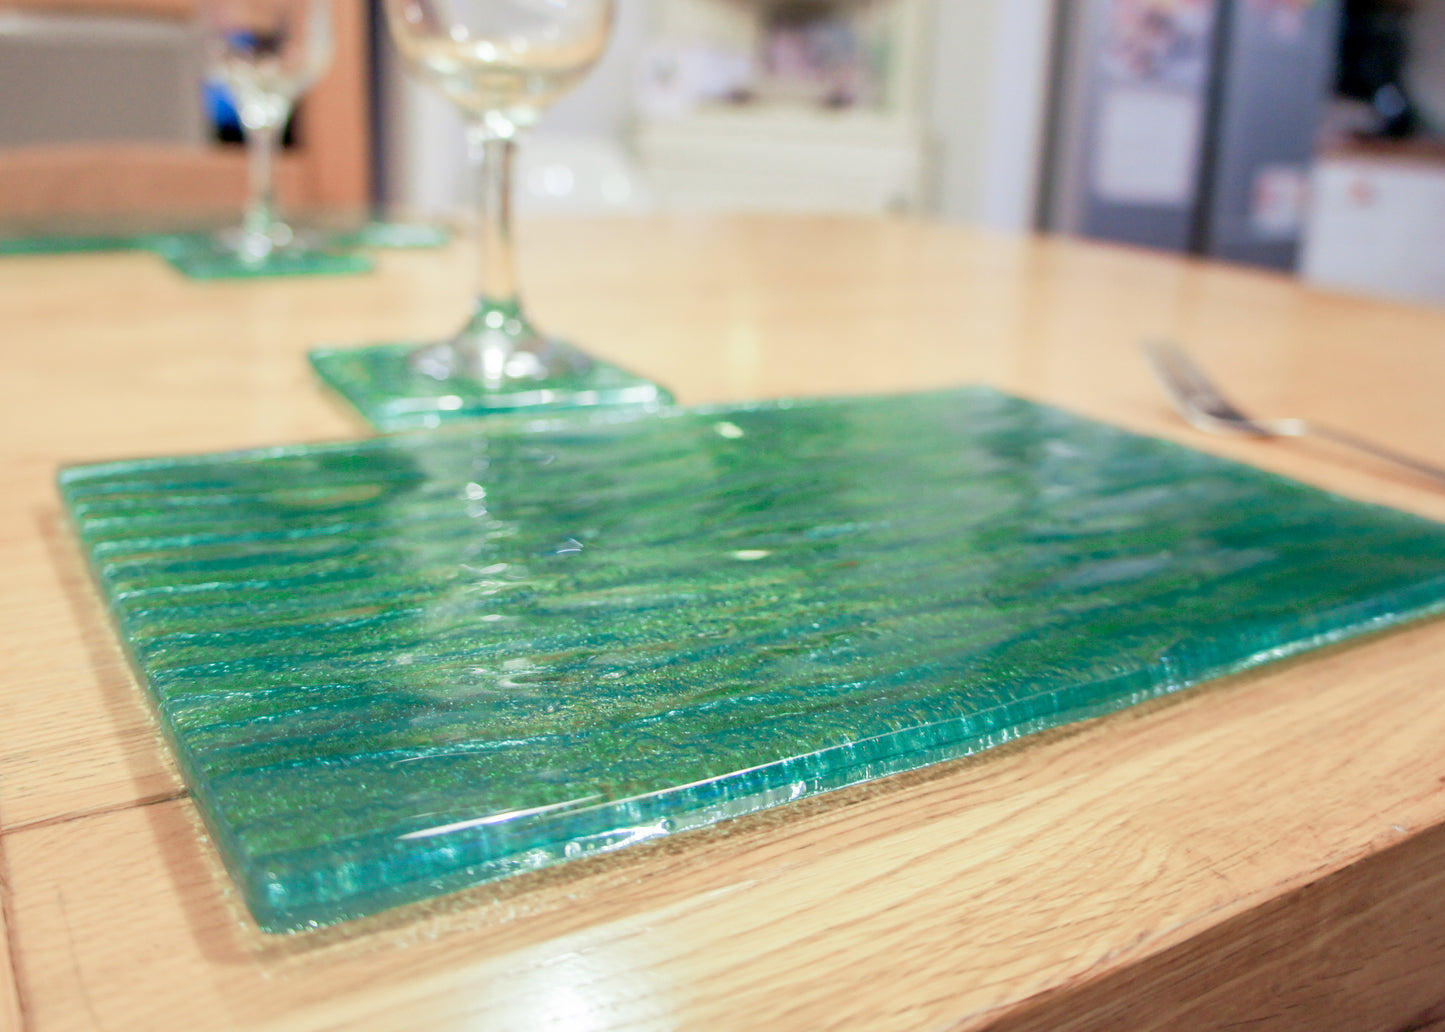 Placemat + Coaster - Seabed Turquoise Placemat 30x20cm(11 3/4 x 8 1/4") + matching coaster 10x10cm (4")